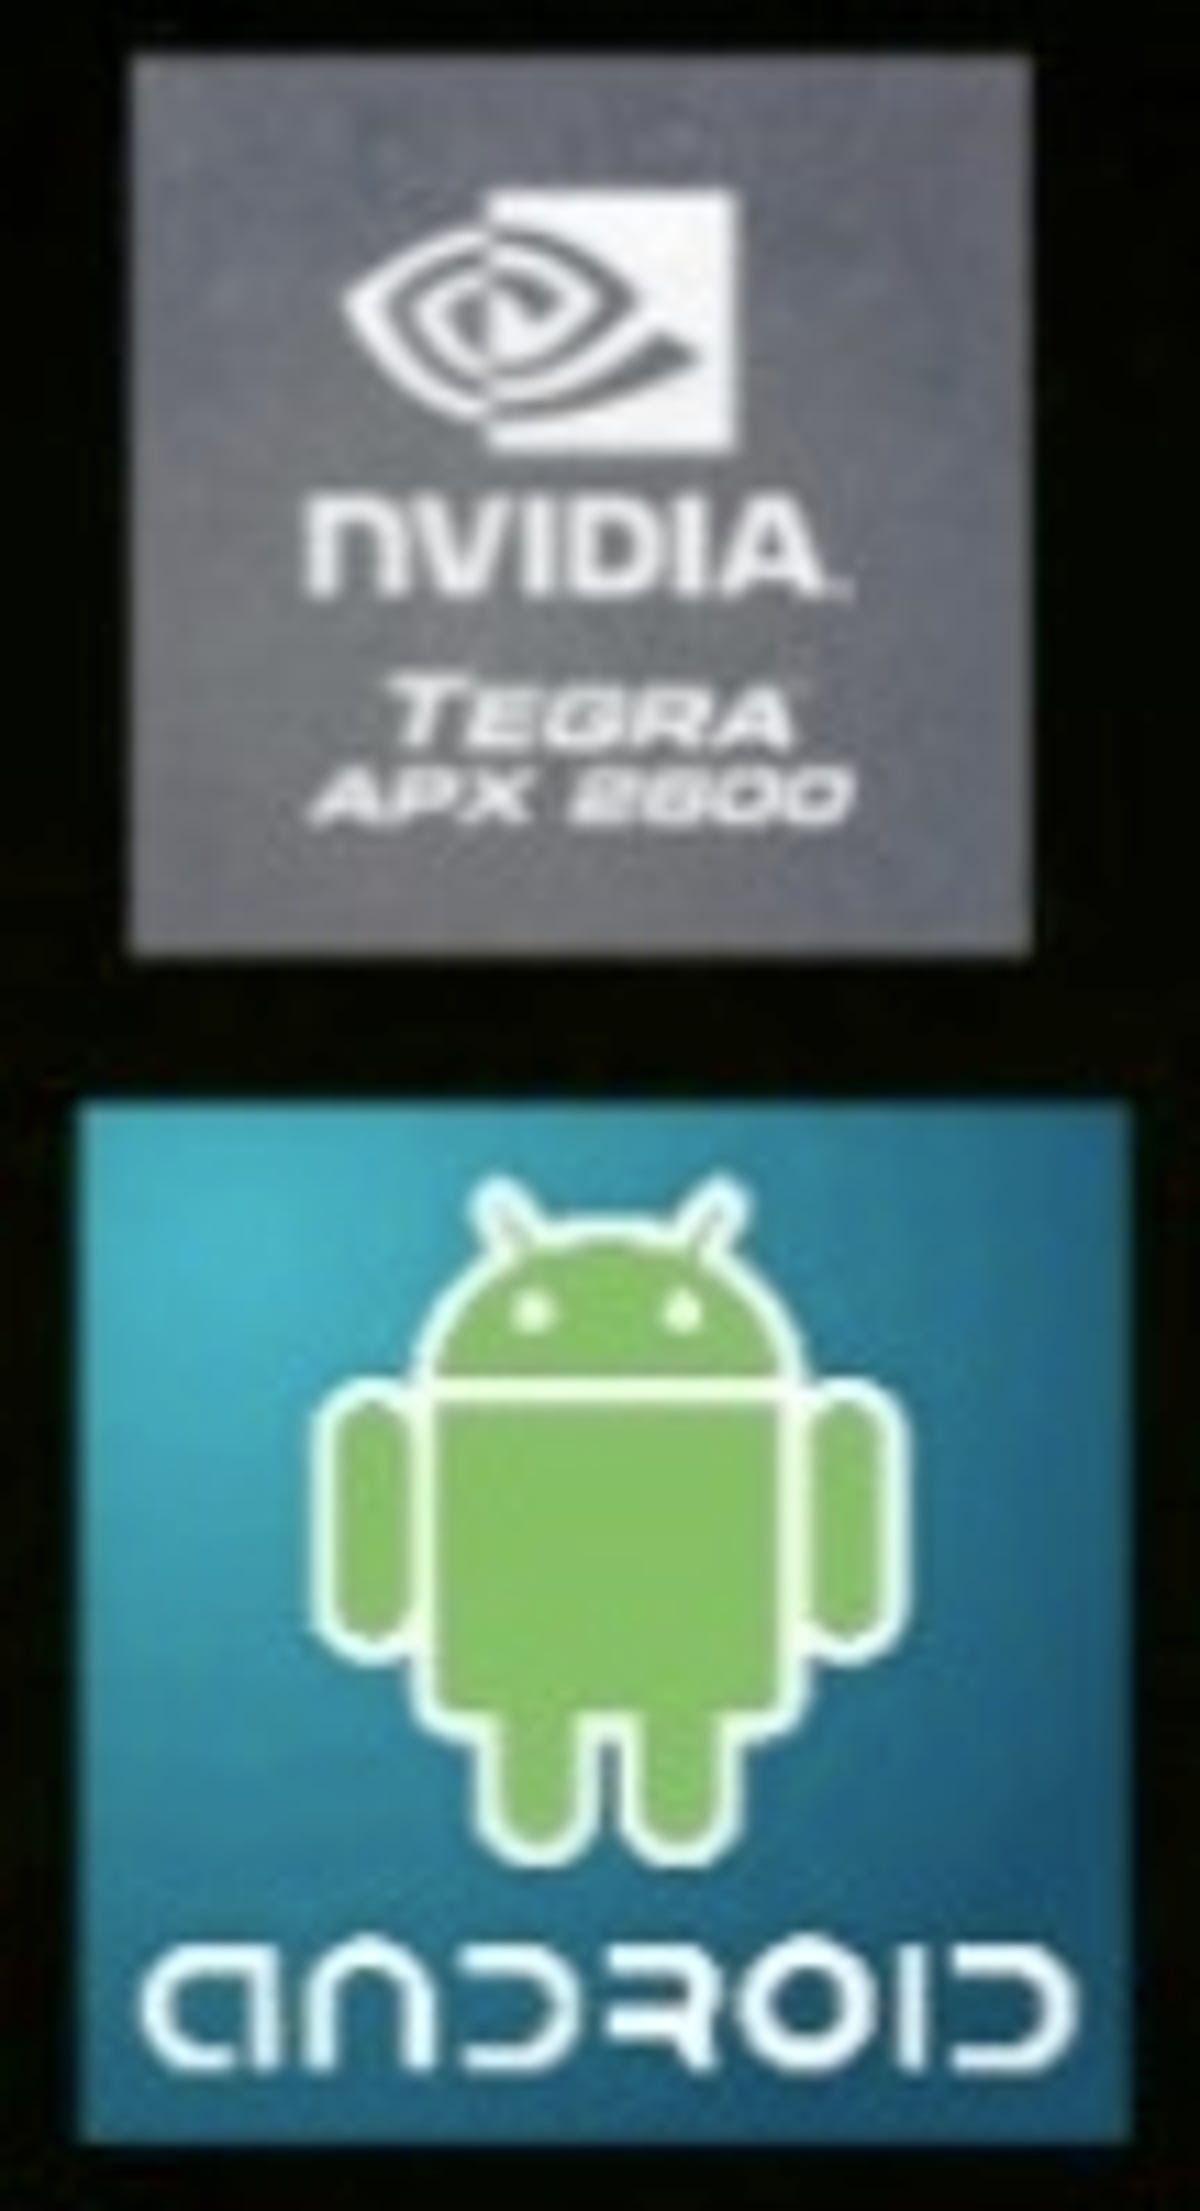 Tegra aims at Android phones